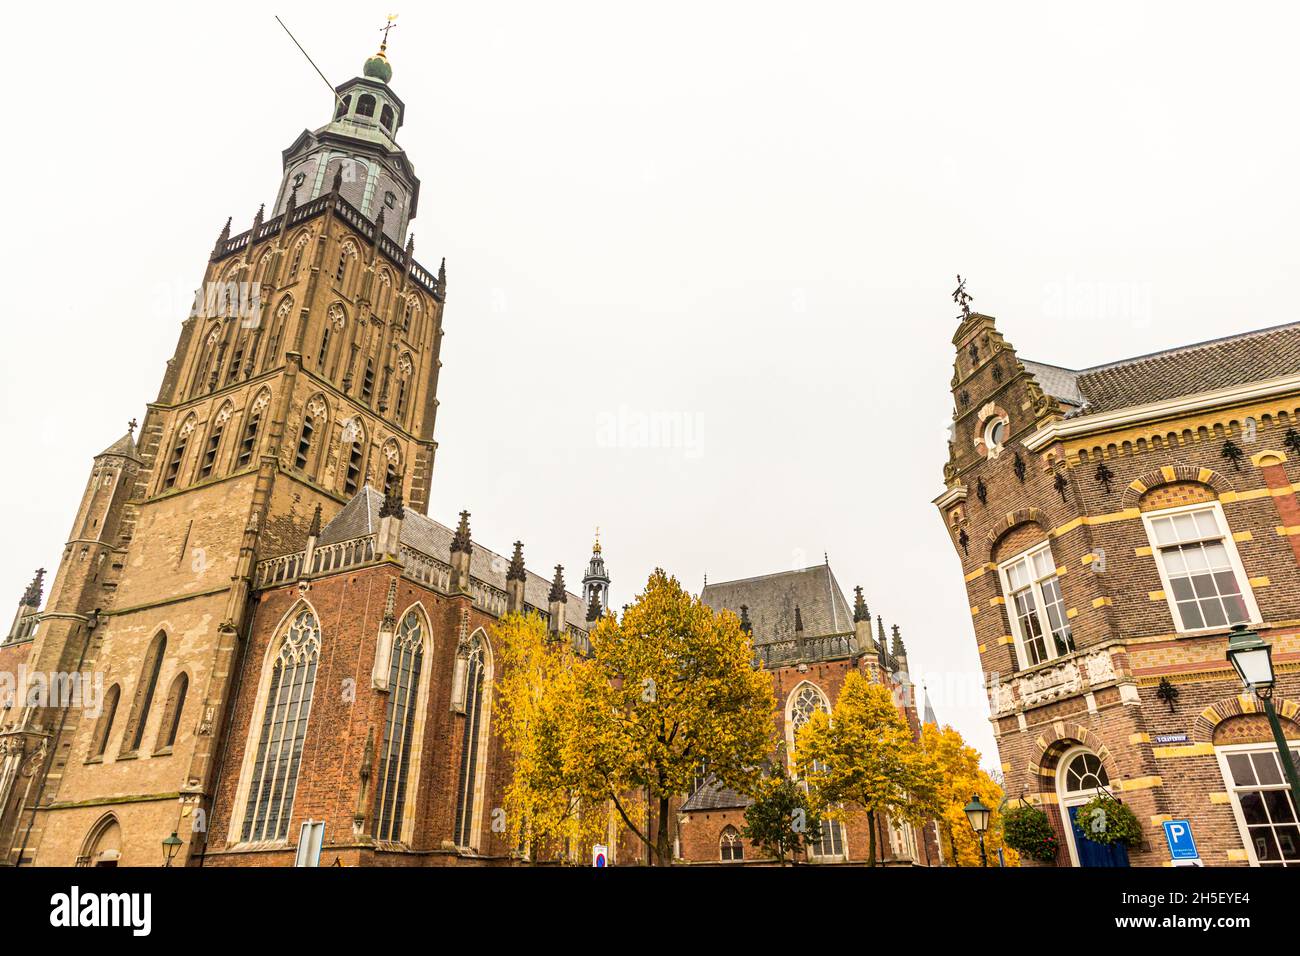 The Hanseatic City of Zutphen in the Netherlands Stock Photo